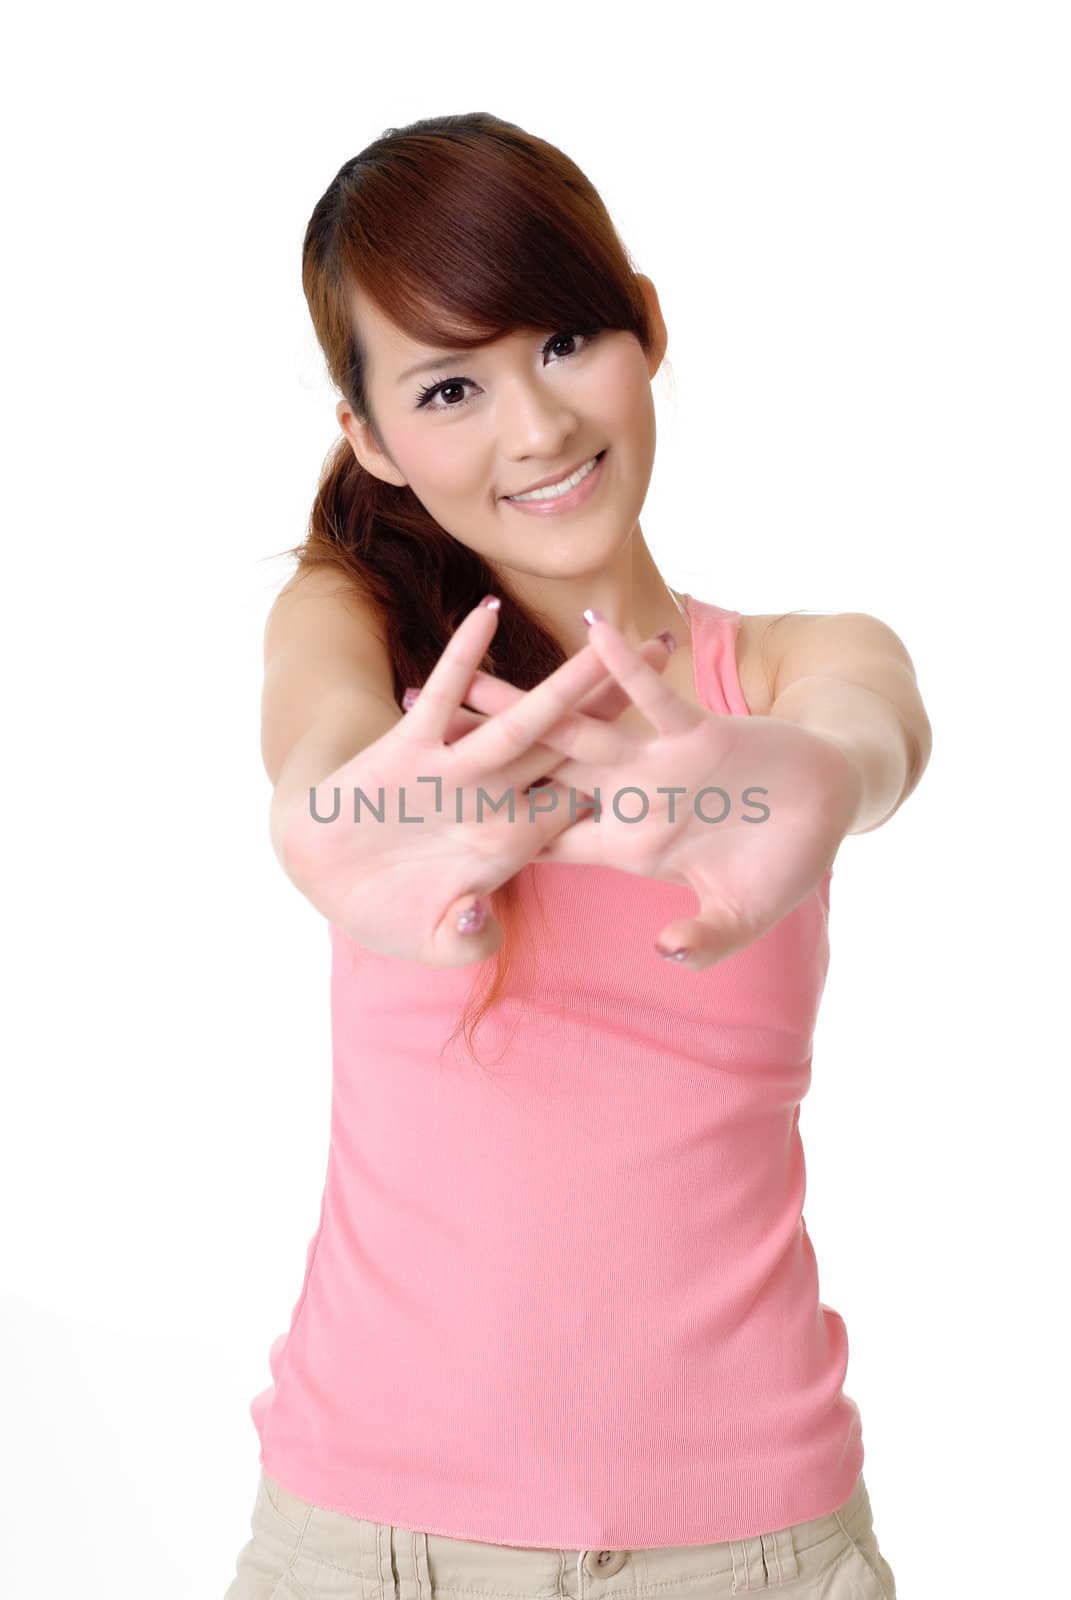 Portrait of sweet girl with smiling expression on white background.